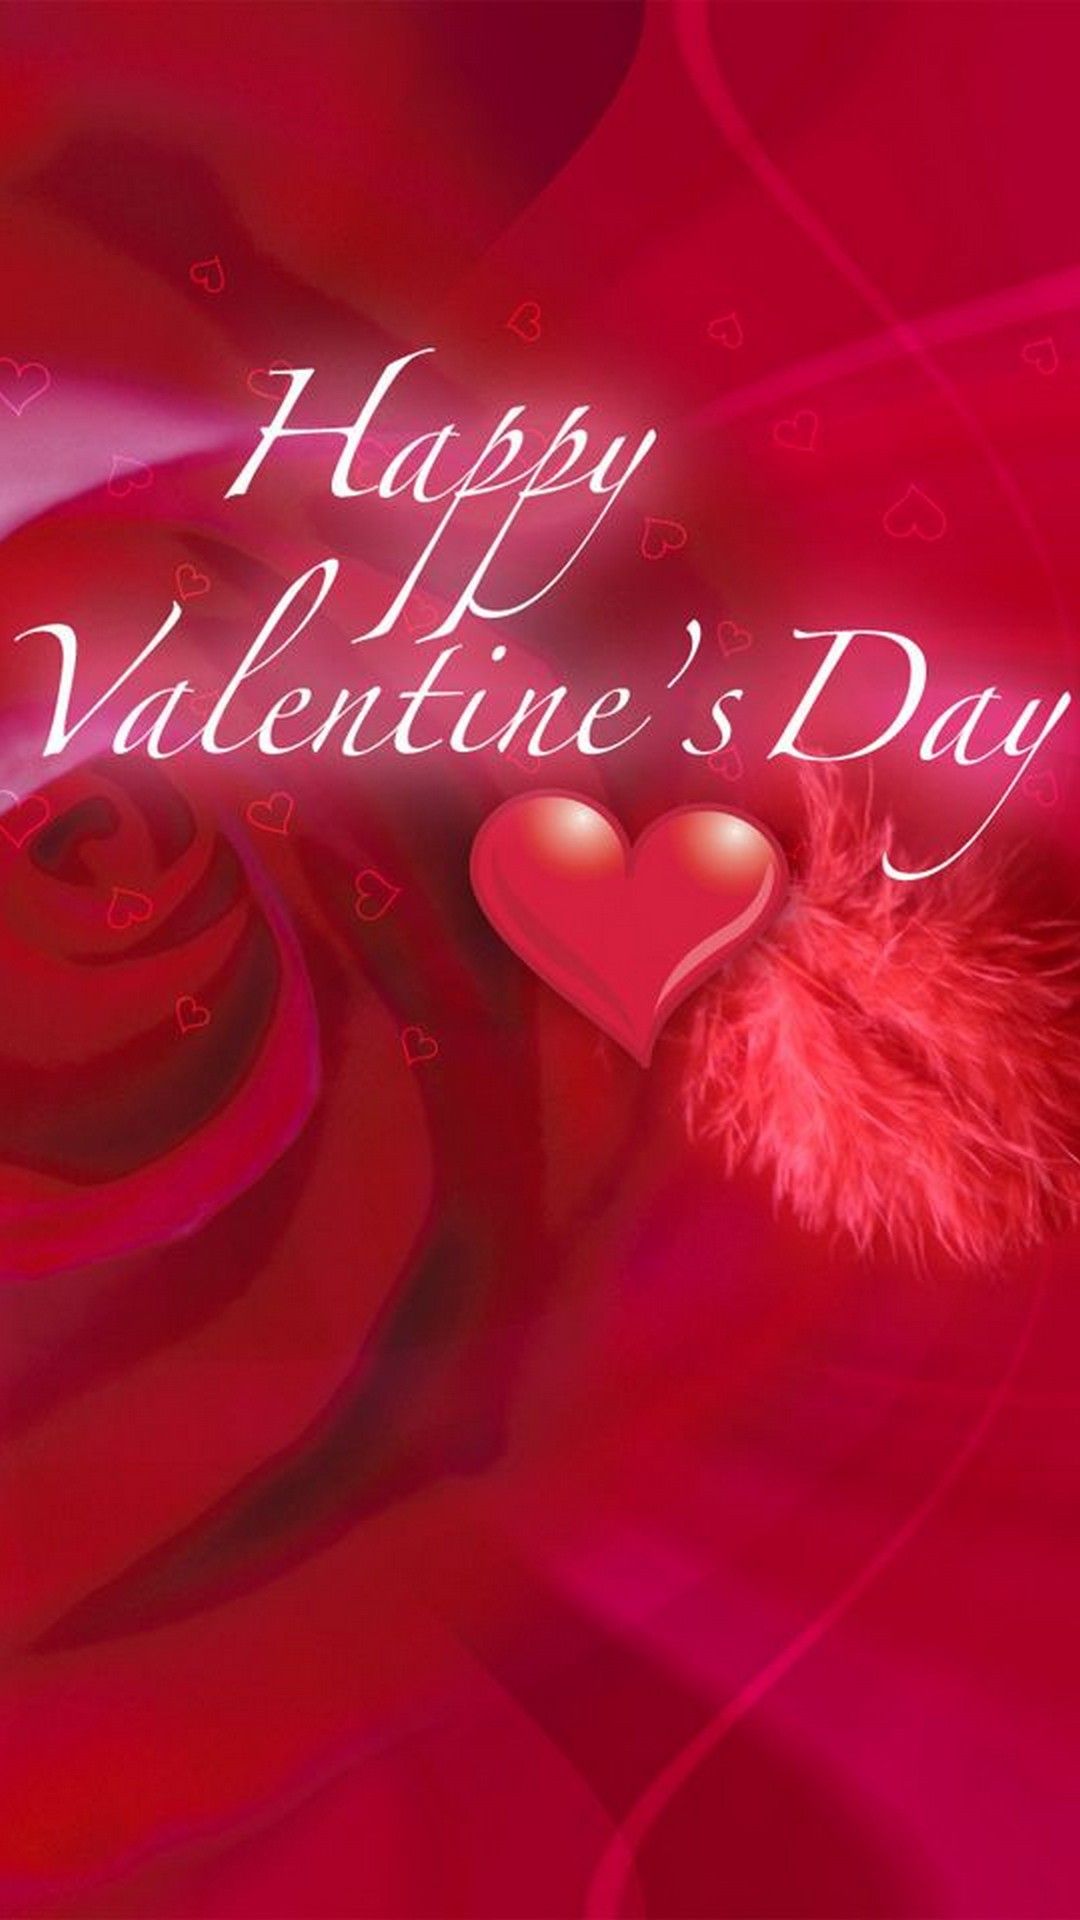 Happy Valentines Day Image Android Wallpaper